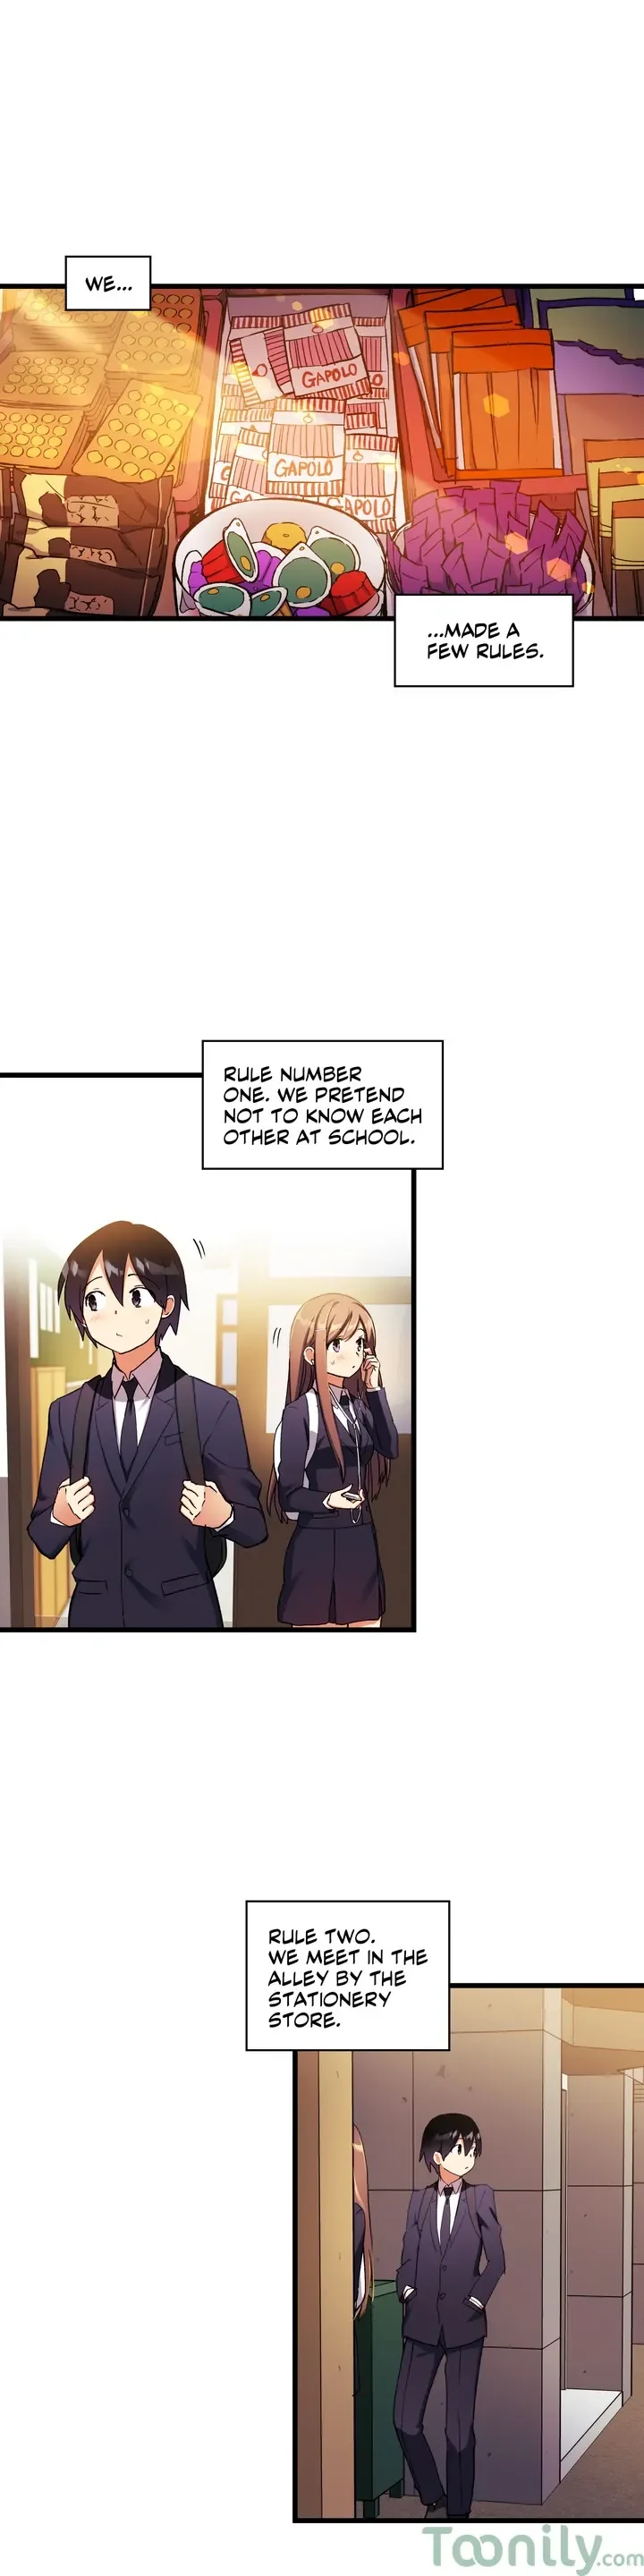 under-observation-my-first-loves-and-i-chap-31-3